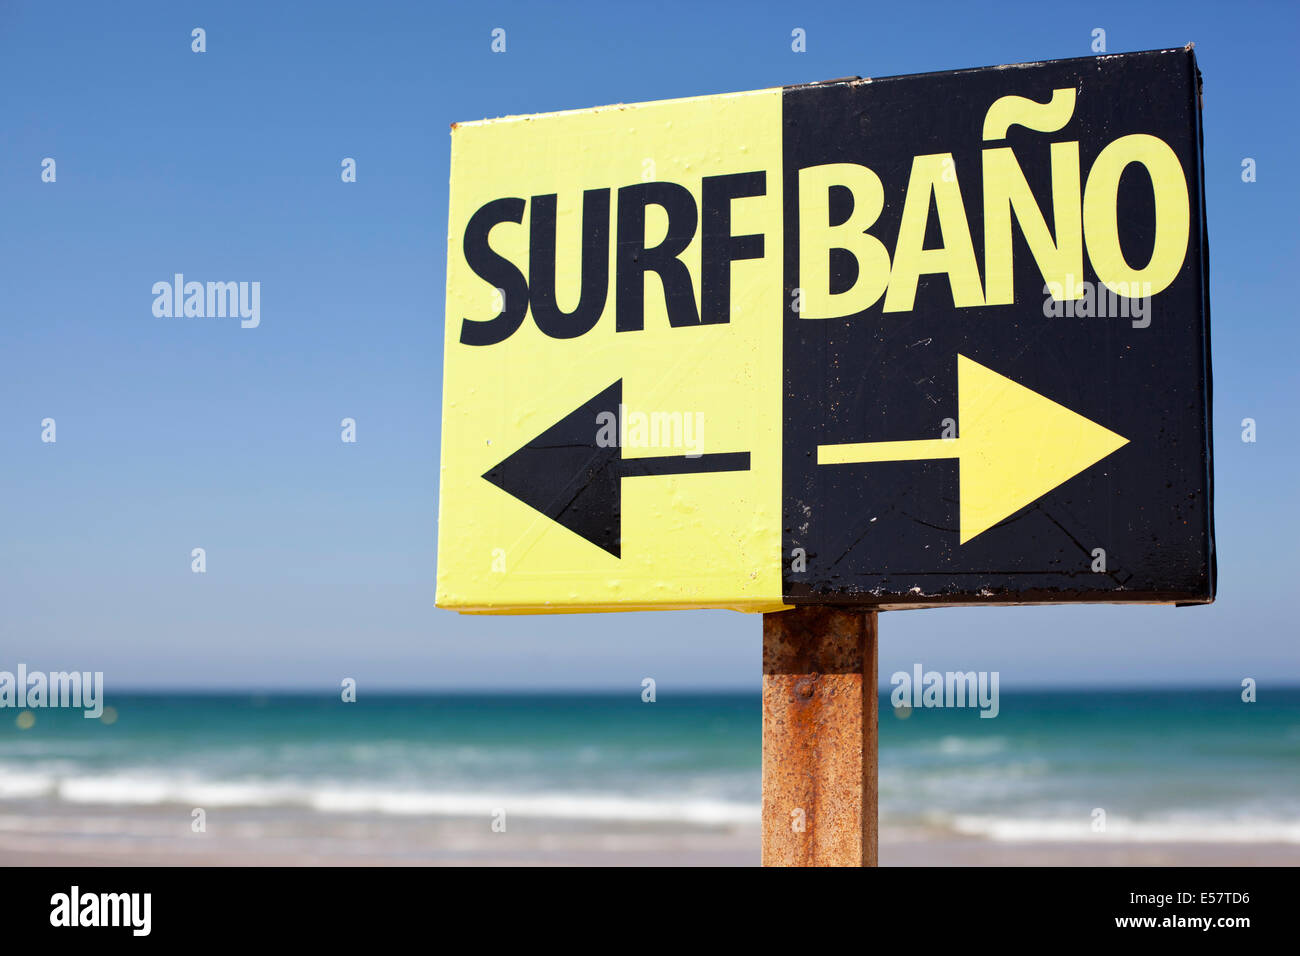 black and yellow arrow surf swimming bano sign on Spanish beach with white waves sand blue skies Stock Photo